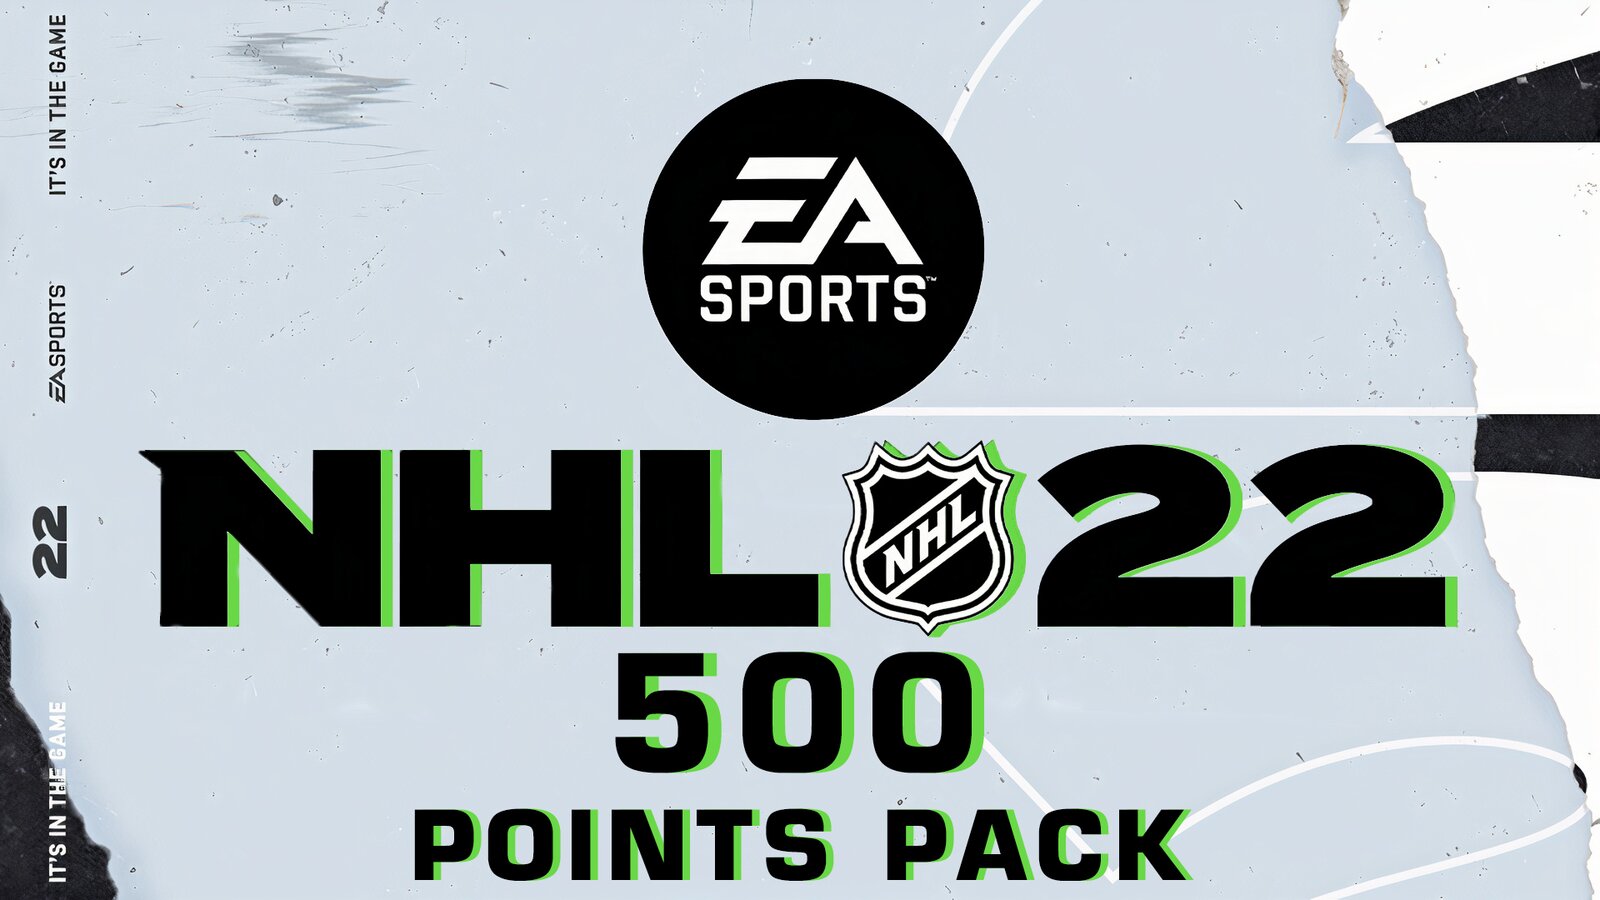 NHL 22 - 500 Points Pack